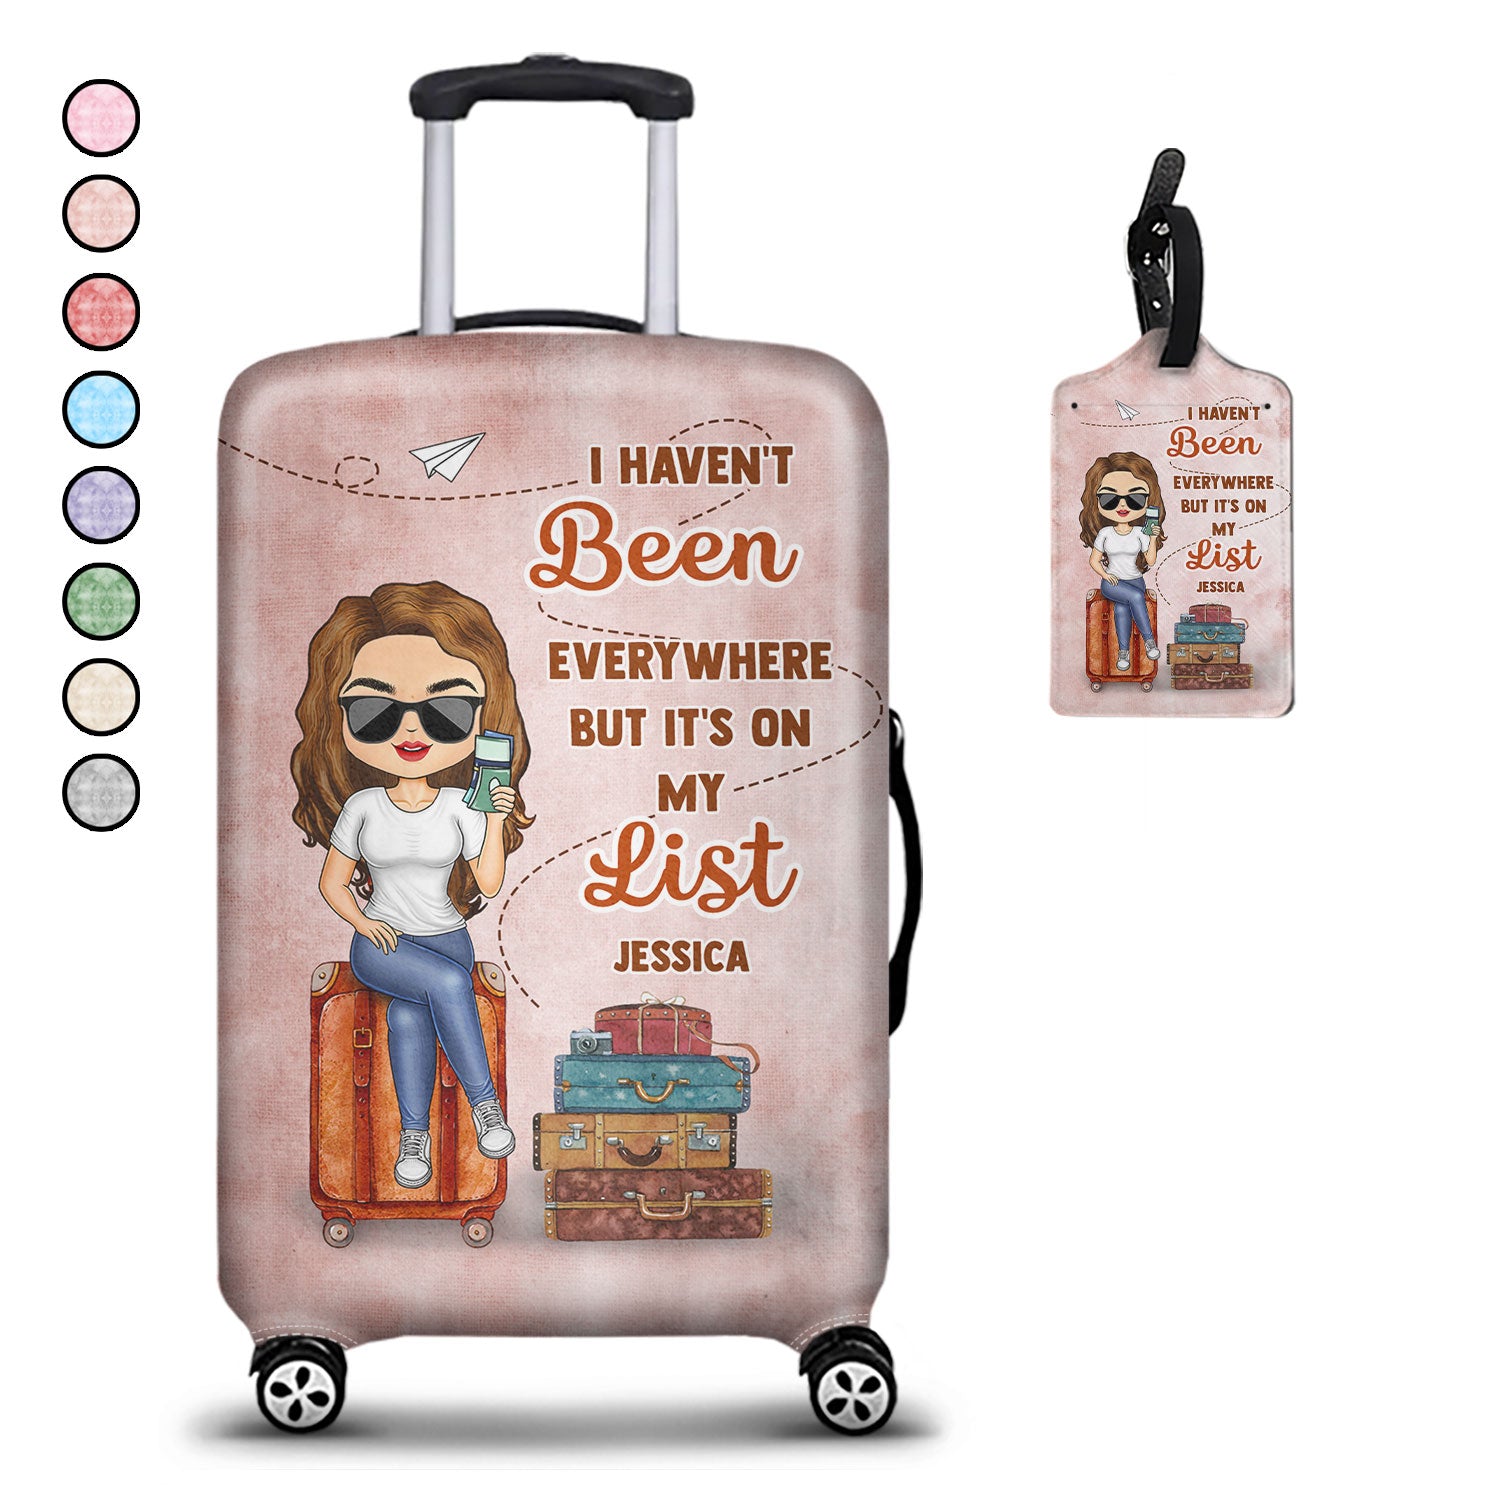 It's On My List - Gift For Traveling Lovers, Vacation Lovers, Travelers, Him, Her - Personalized Combo Luggage Cover And Luggage Tag